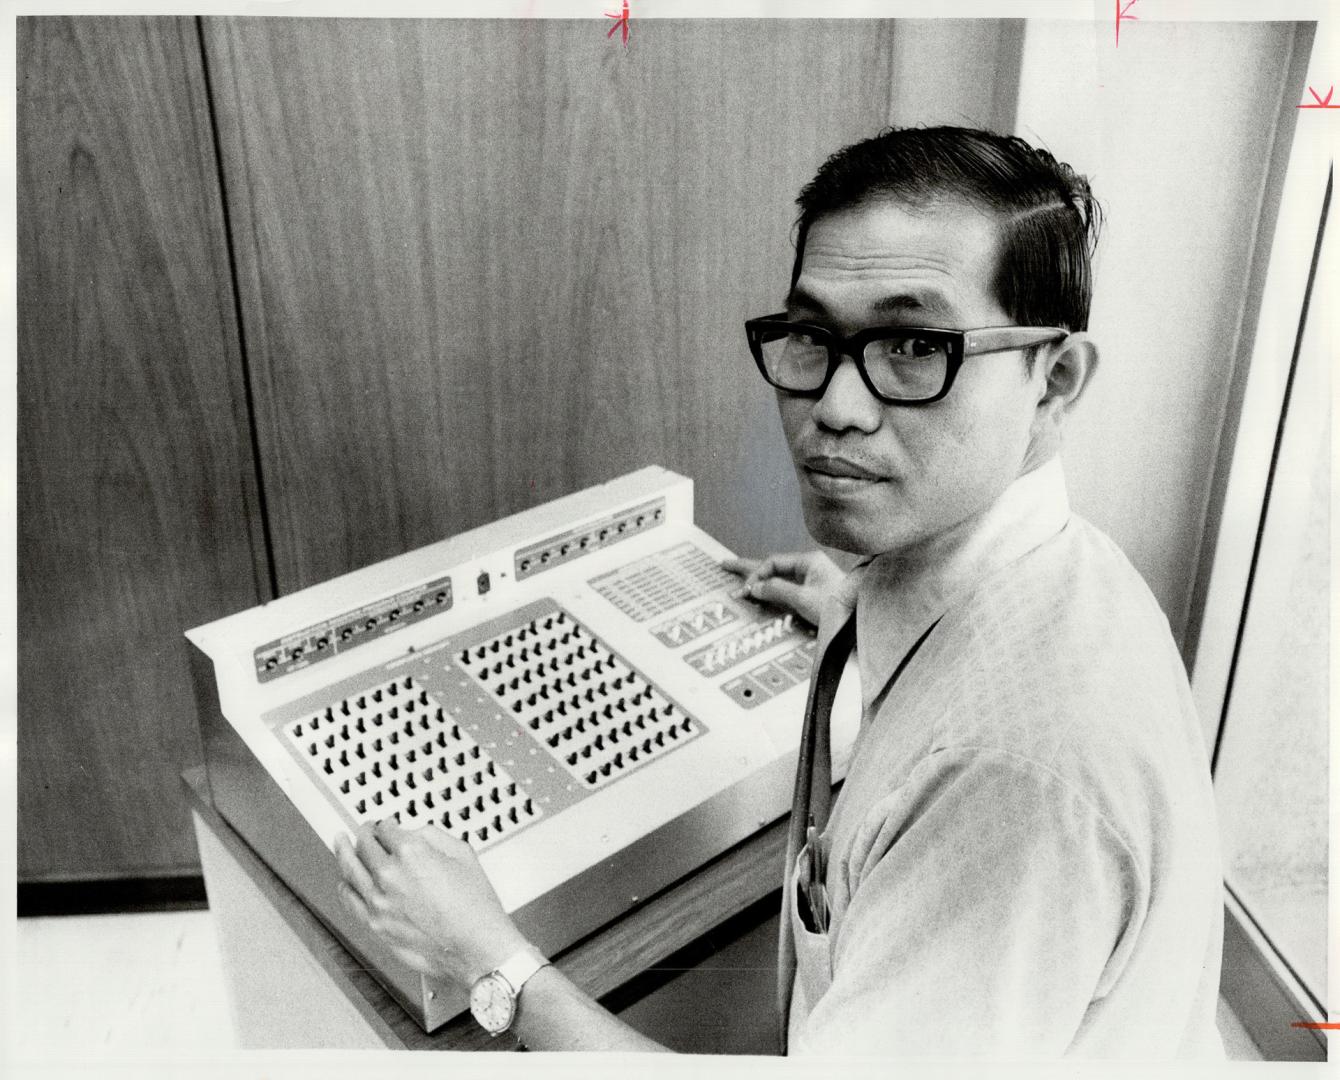 A year after Chang Yun Fui enrolled in a Nation Radio Institute course he had built a desk computer